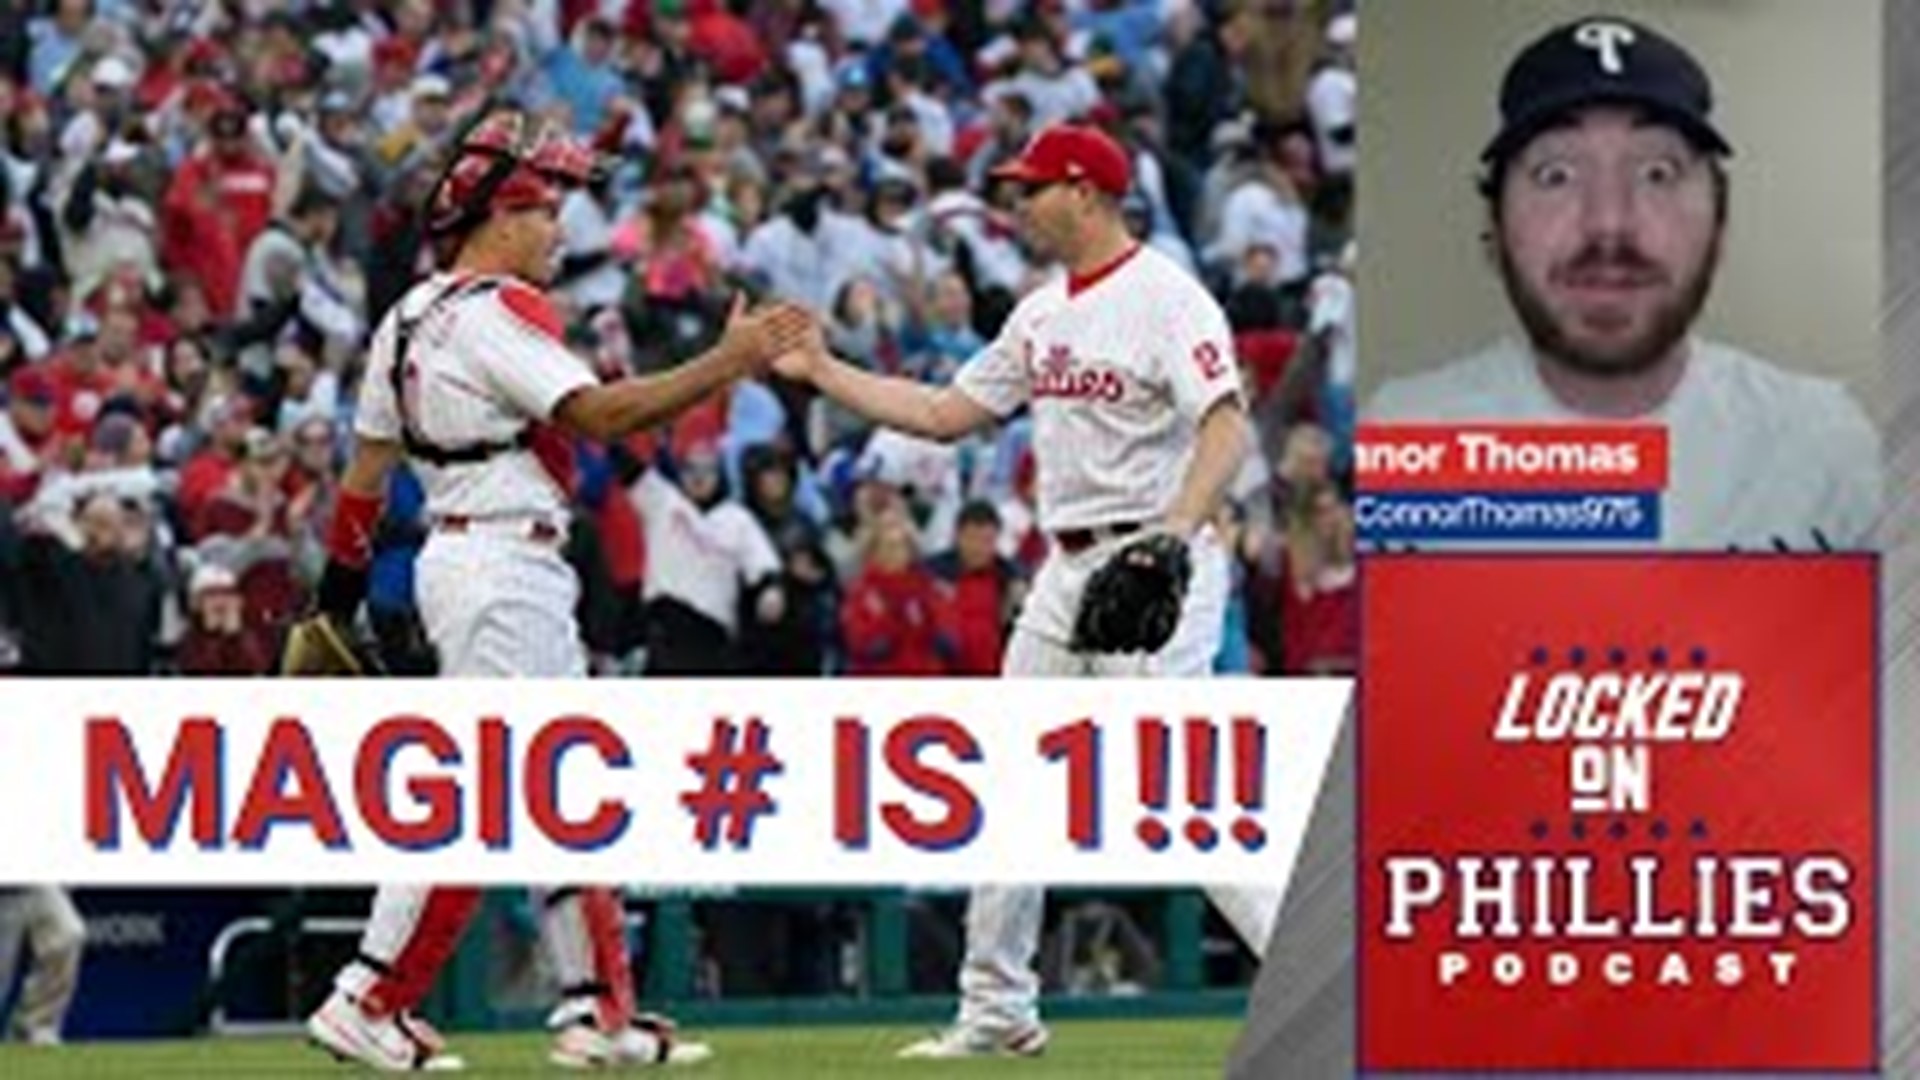 In today's episode, Connor recaps the weekend's action between the Philadelphia Phillies and Washington Nationals and the Milwaukee Brewers and Miami Marlins.